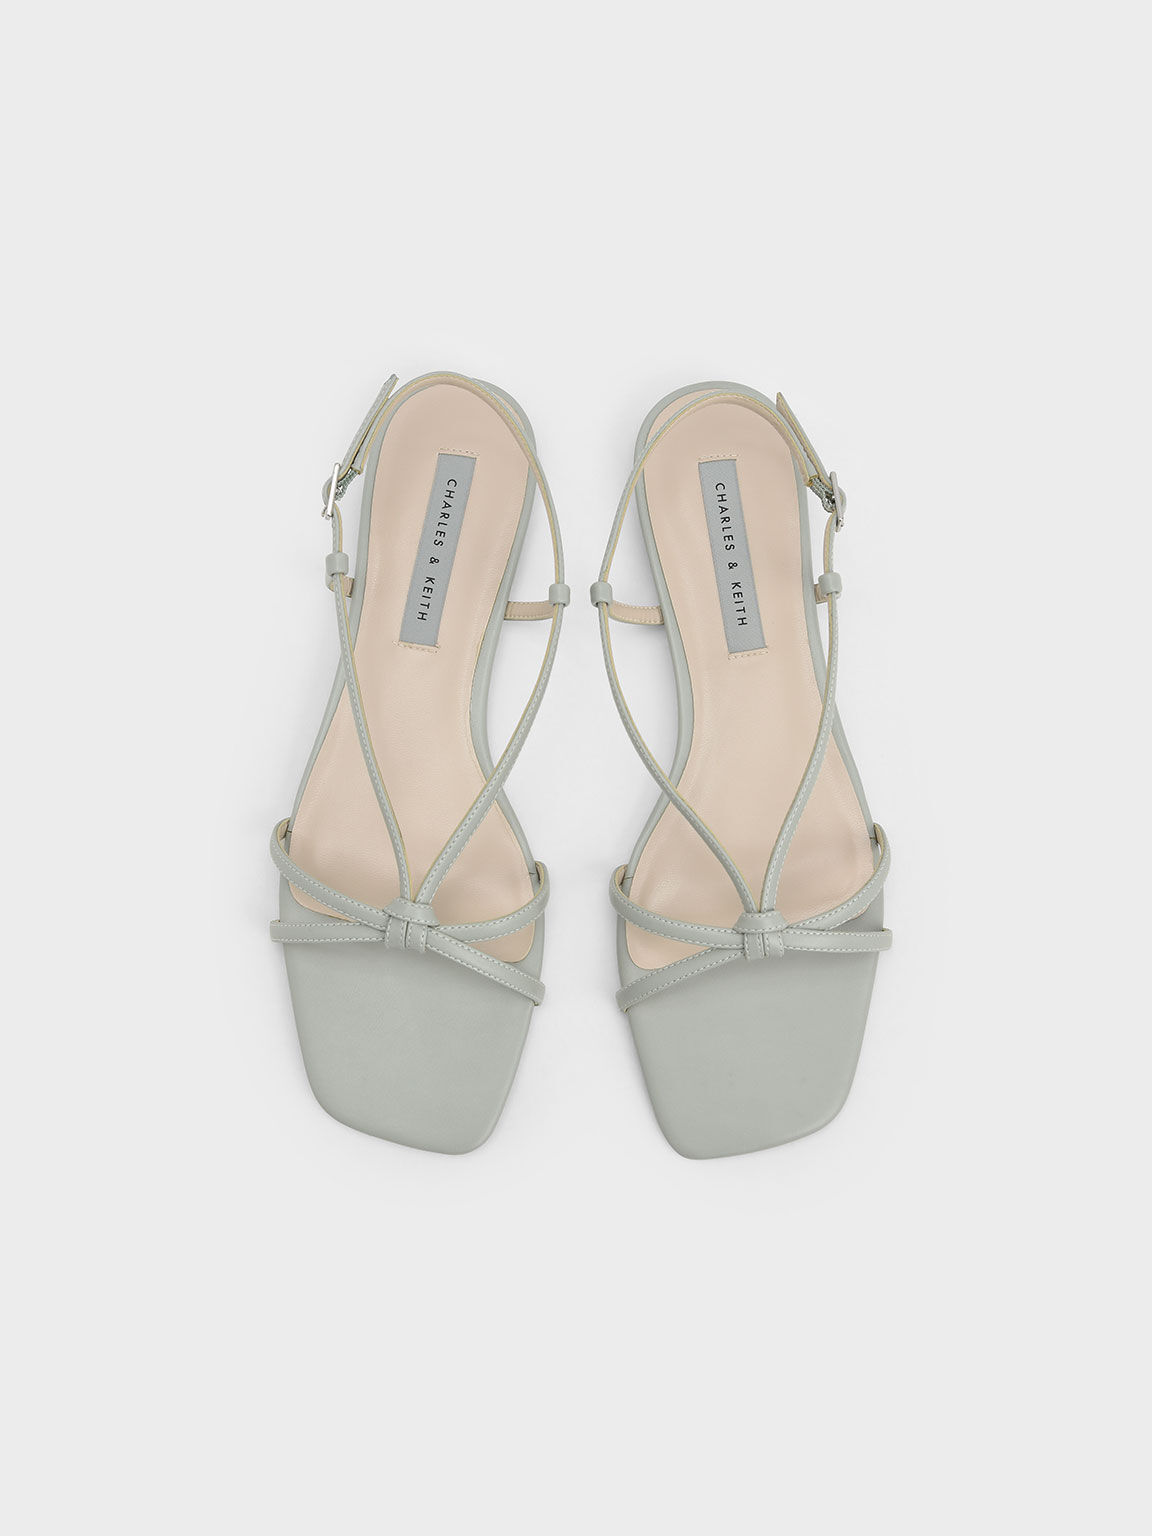 Sandal Strappy Knotted Slingback, Mint Green, hi-res